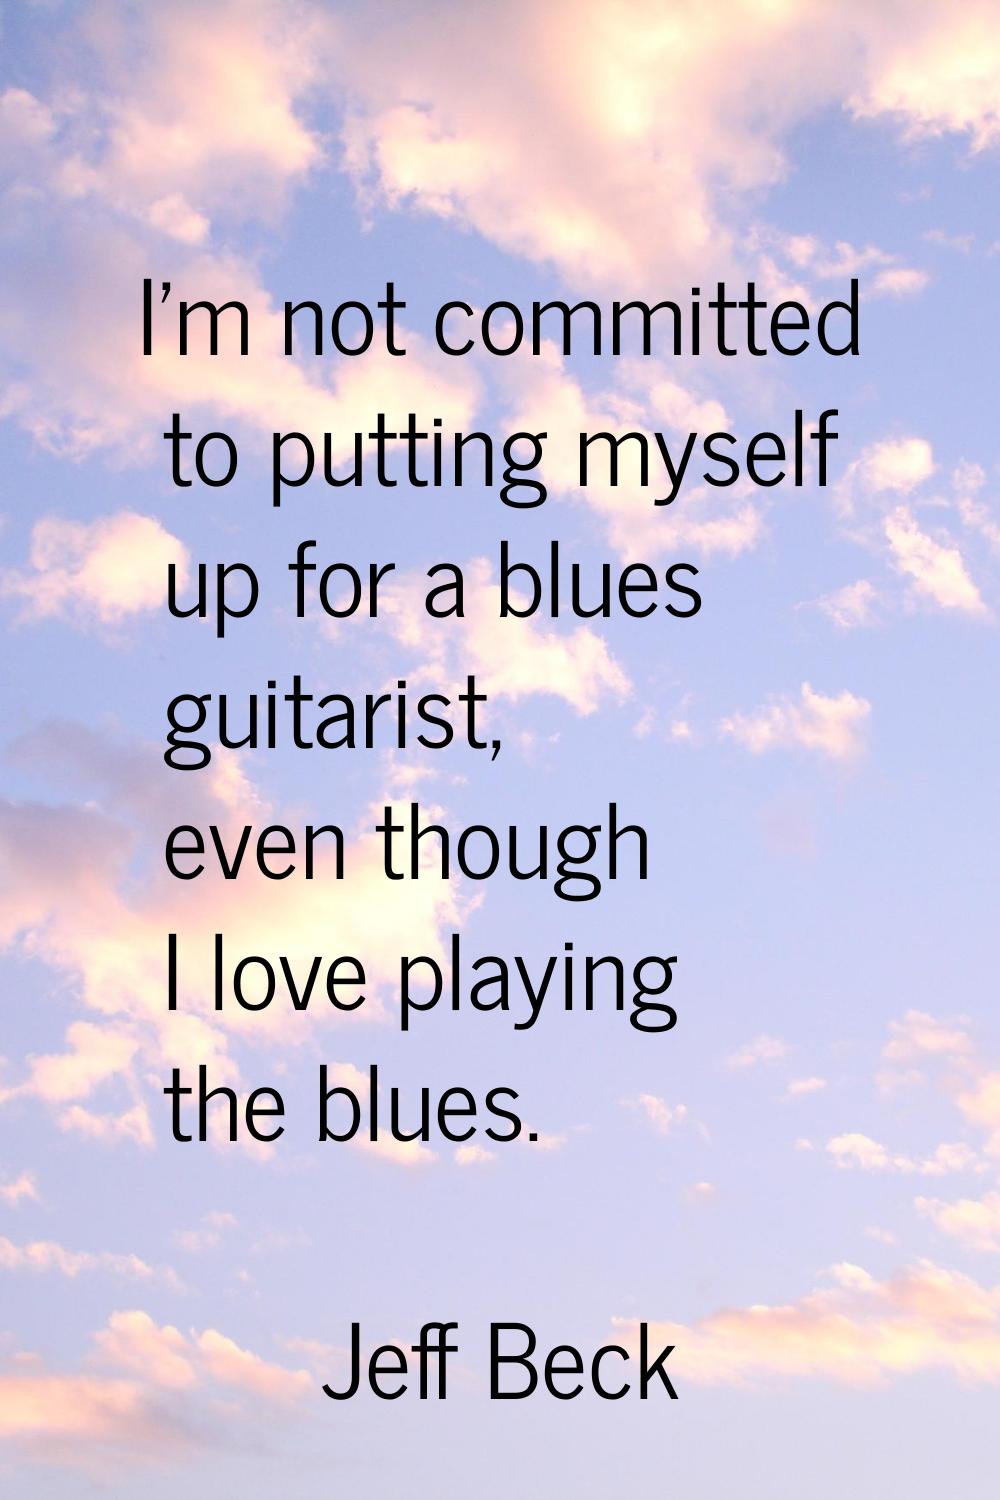 I'm not committed to putting myself up for a blues guitarist, even though I love playing the blues.